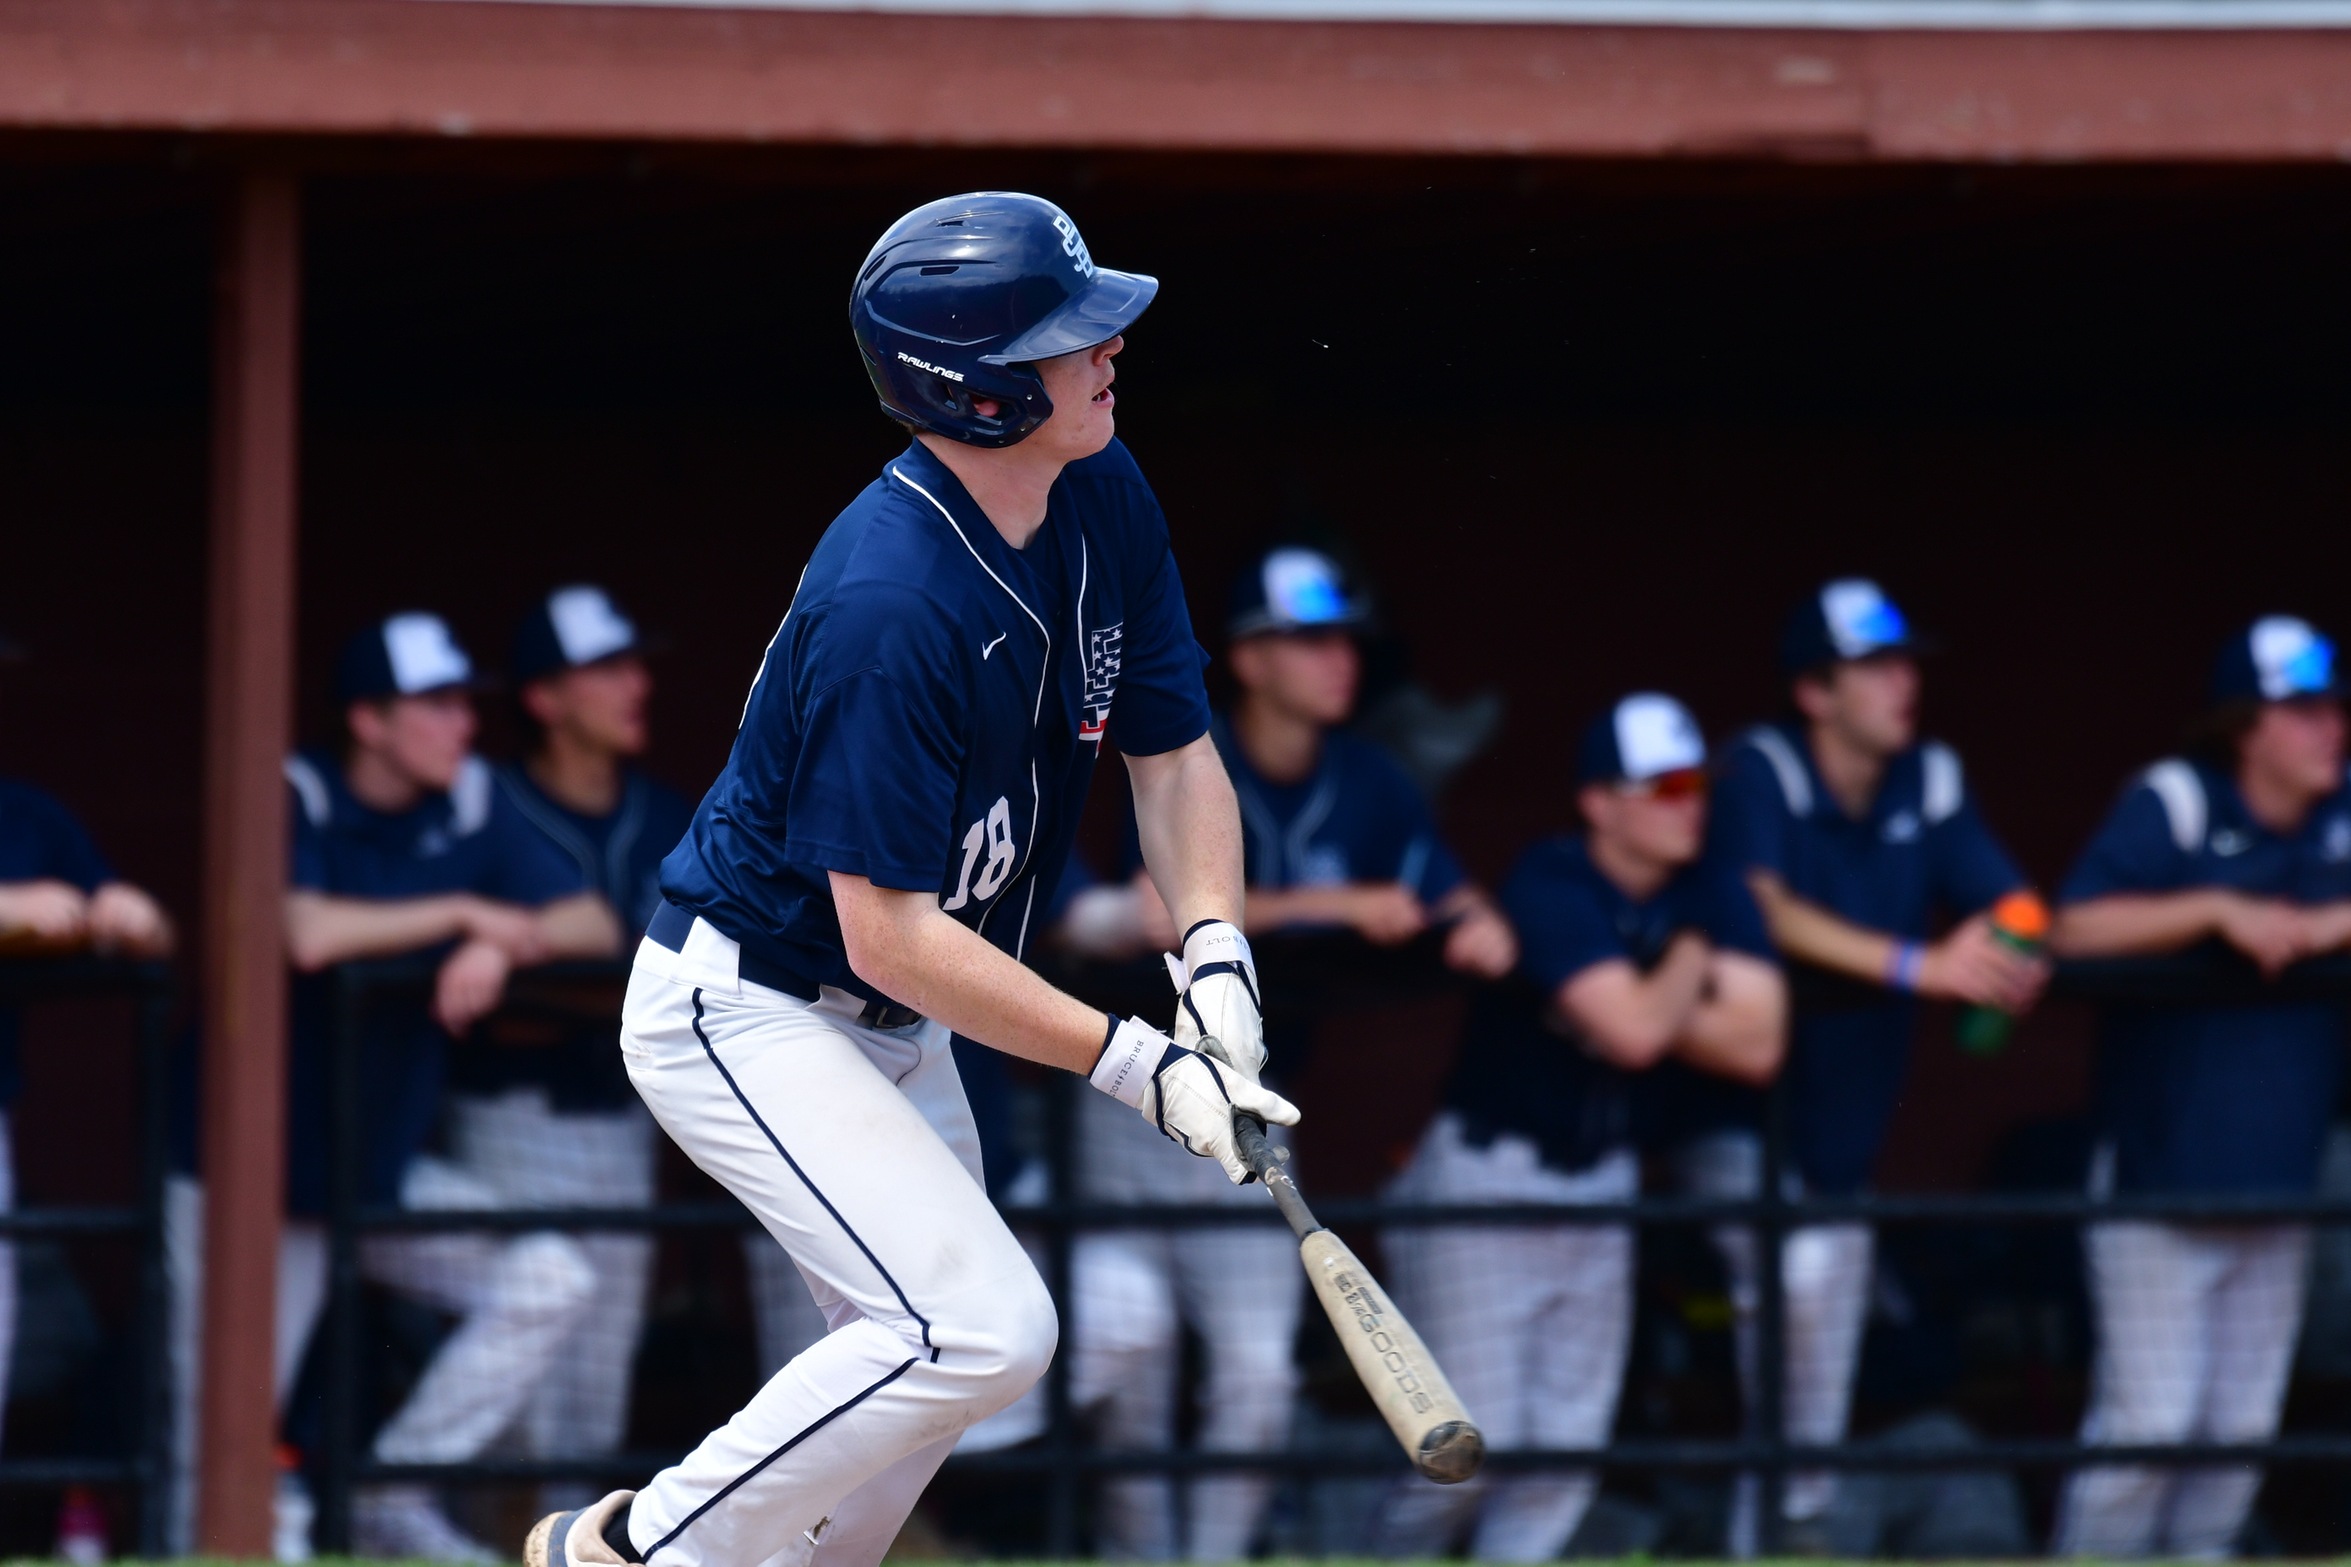 Behrend Halted in Game One At Altoona; Long Ball Propels Behrend To Game Two Victory